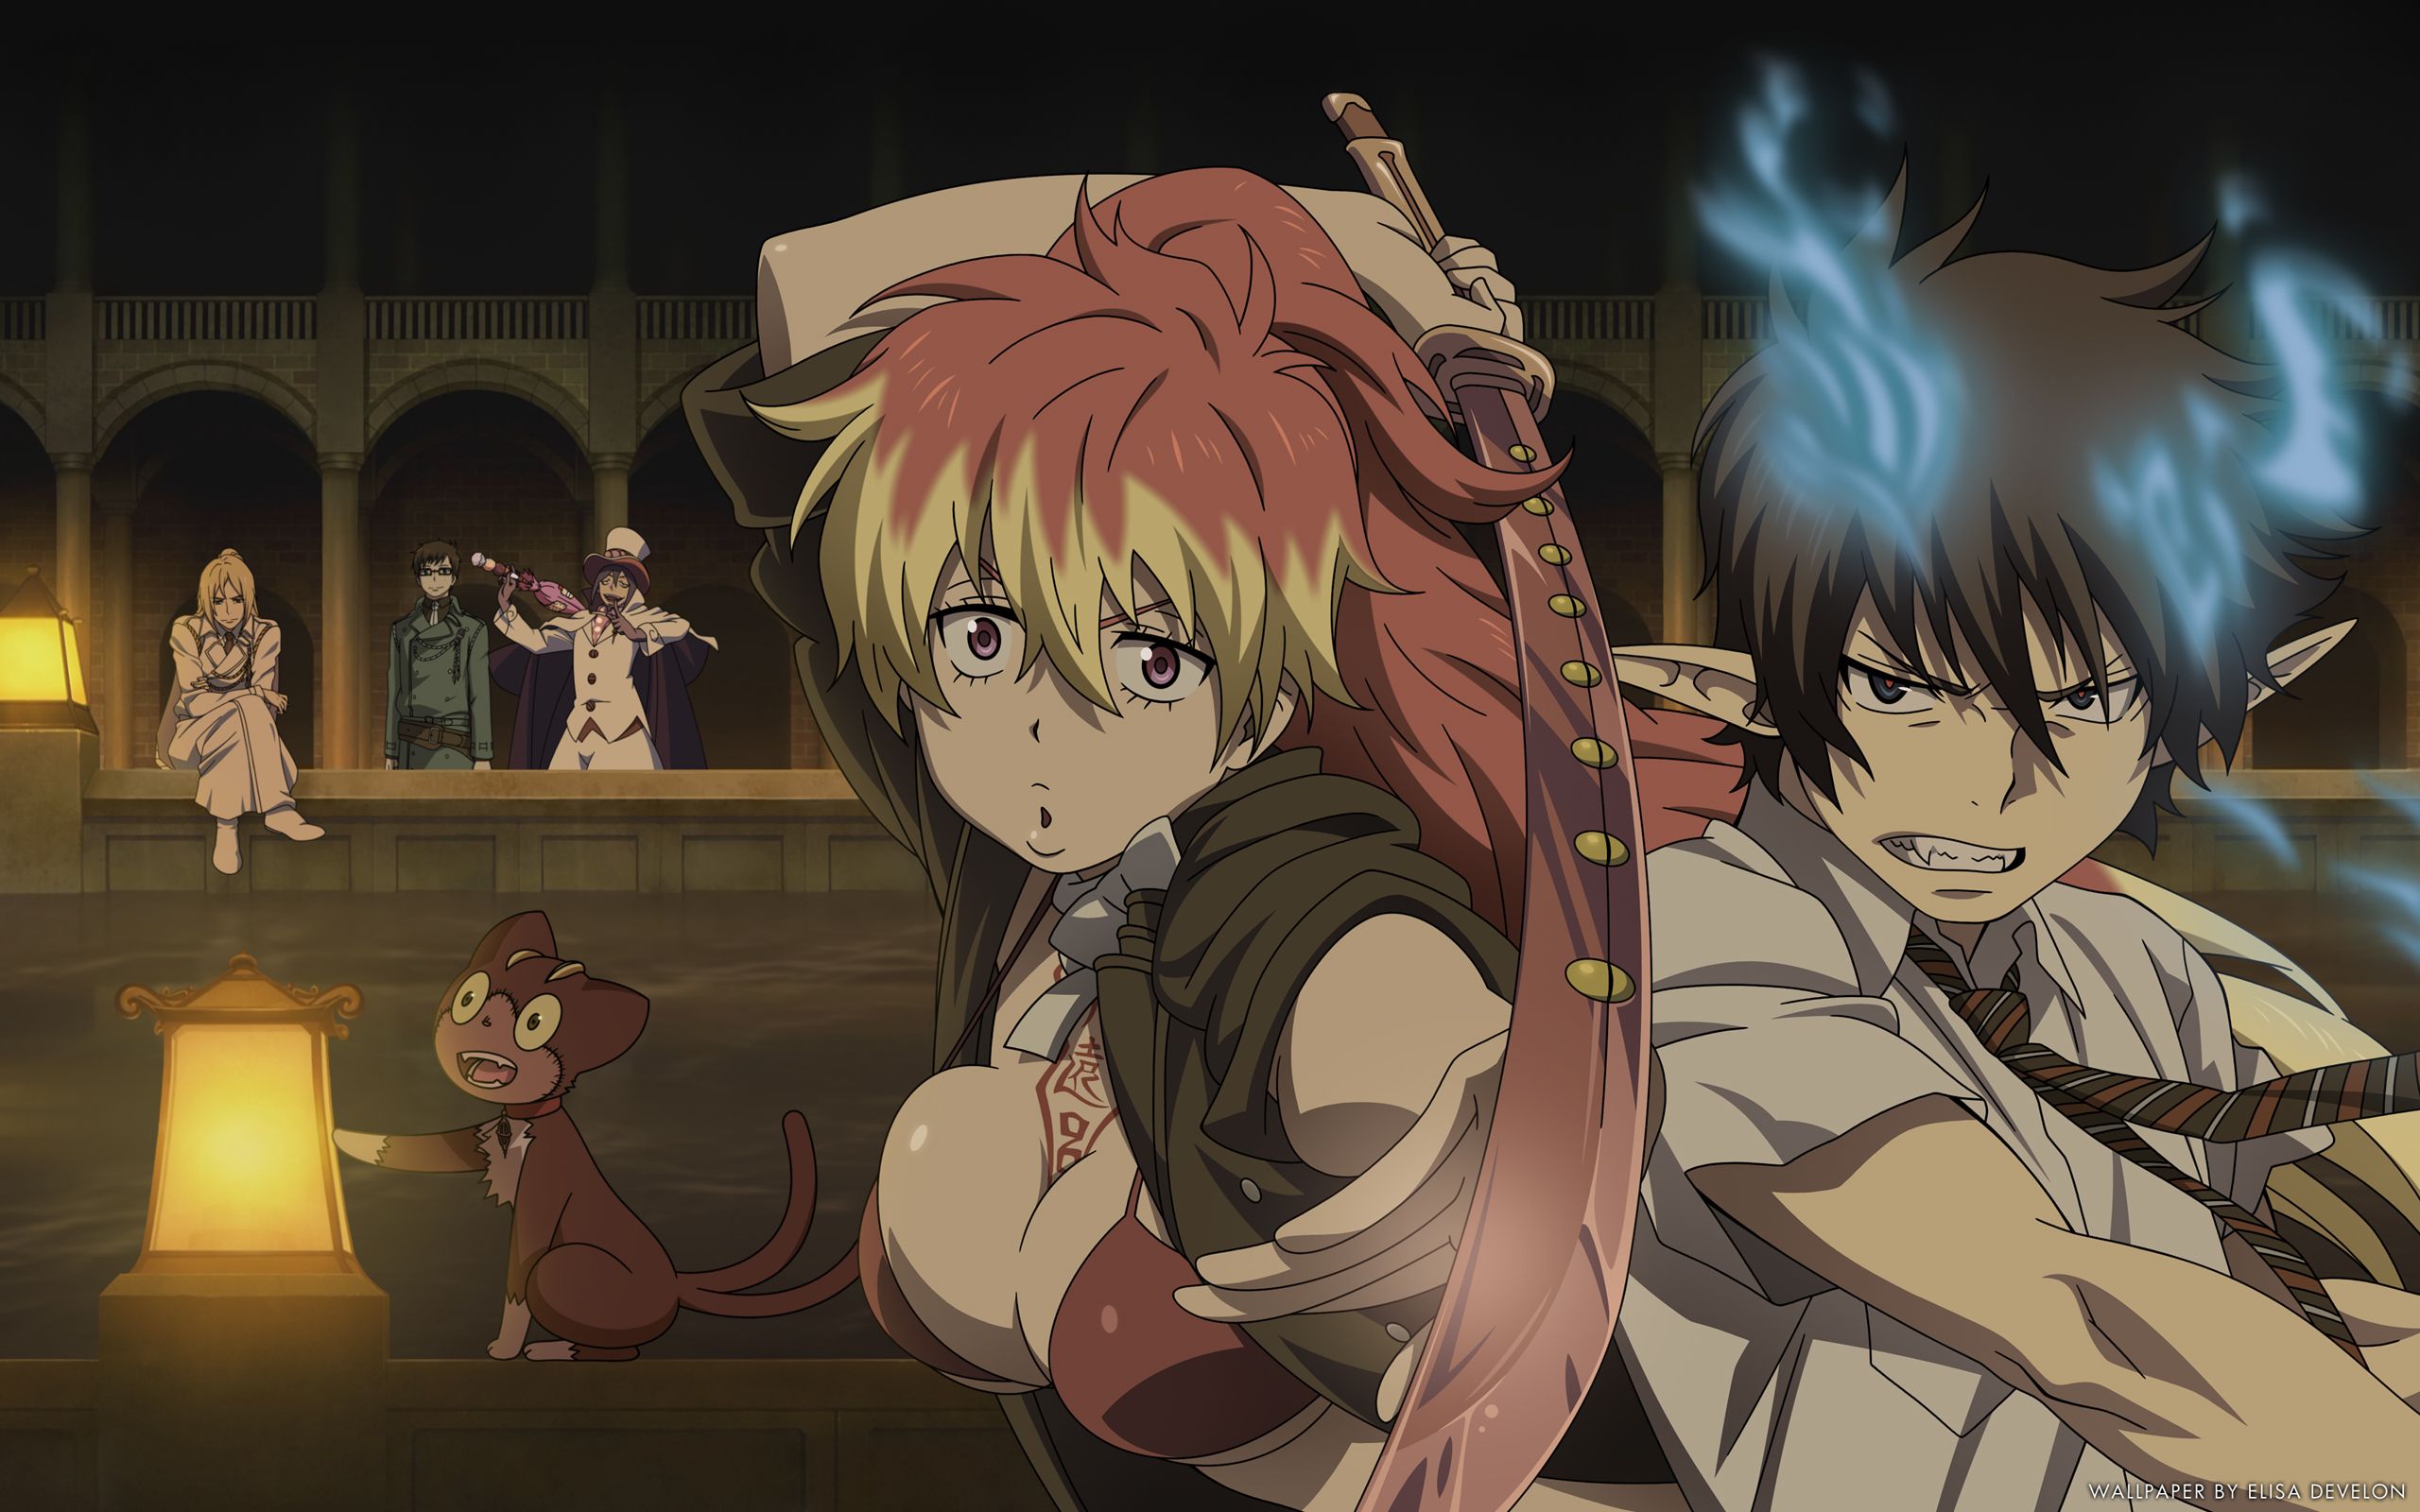 The Anime Kingdom Image Ao No Exorcist Hd Wallpapers